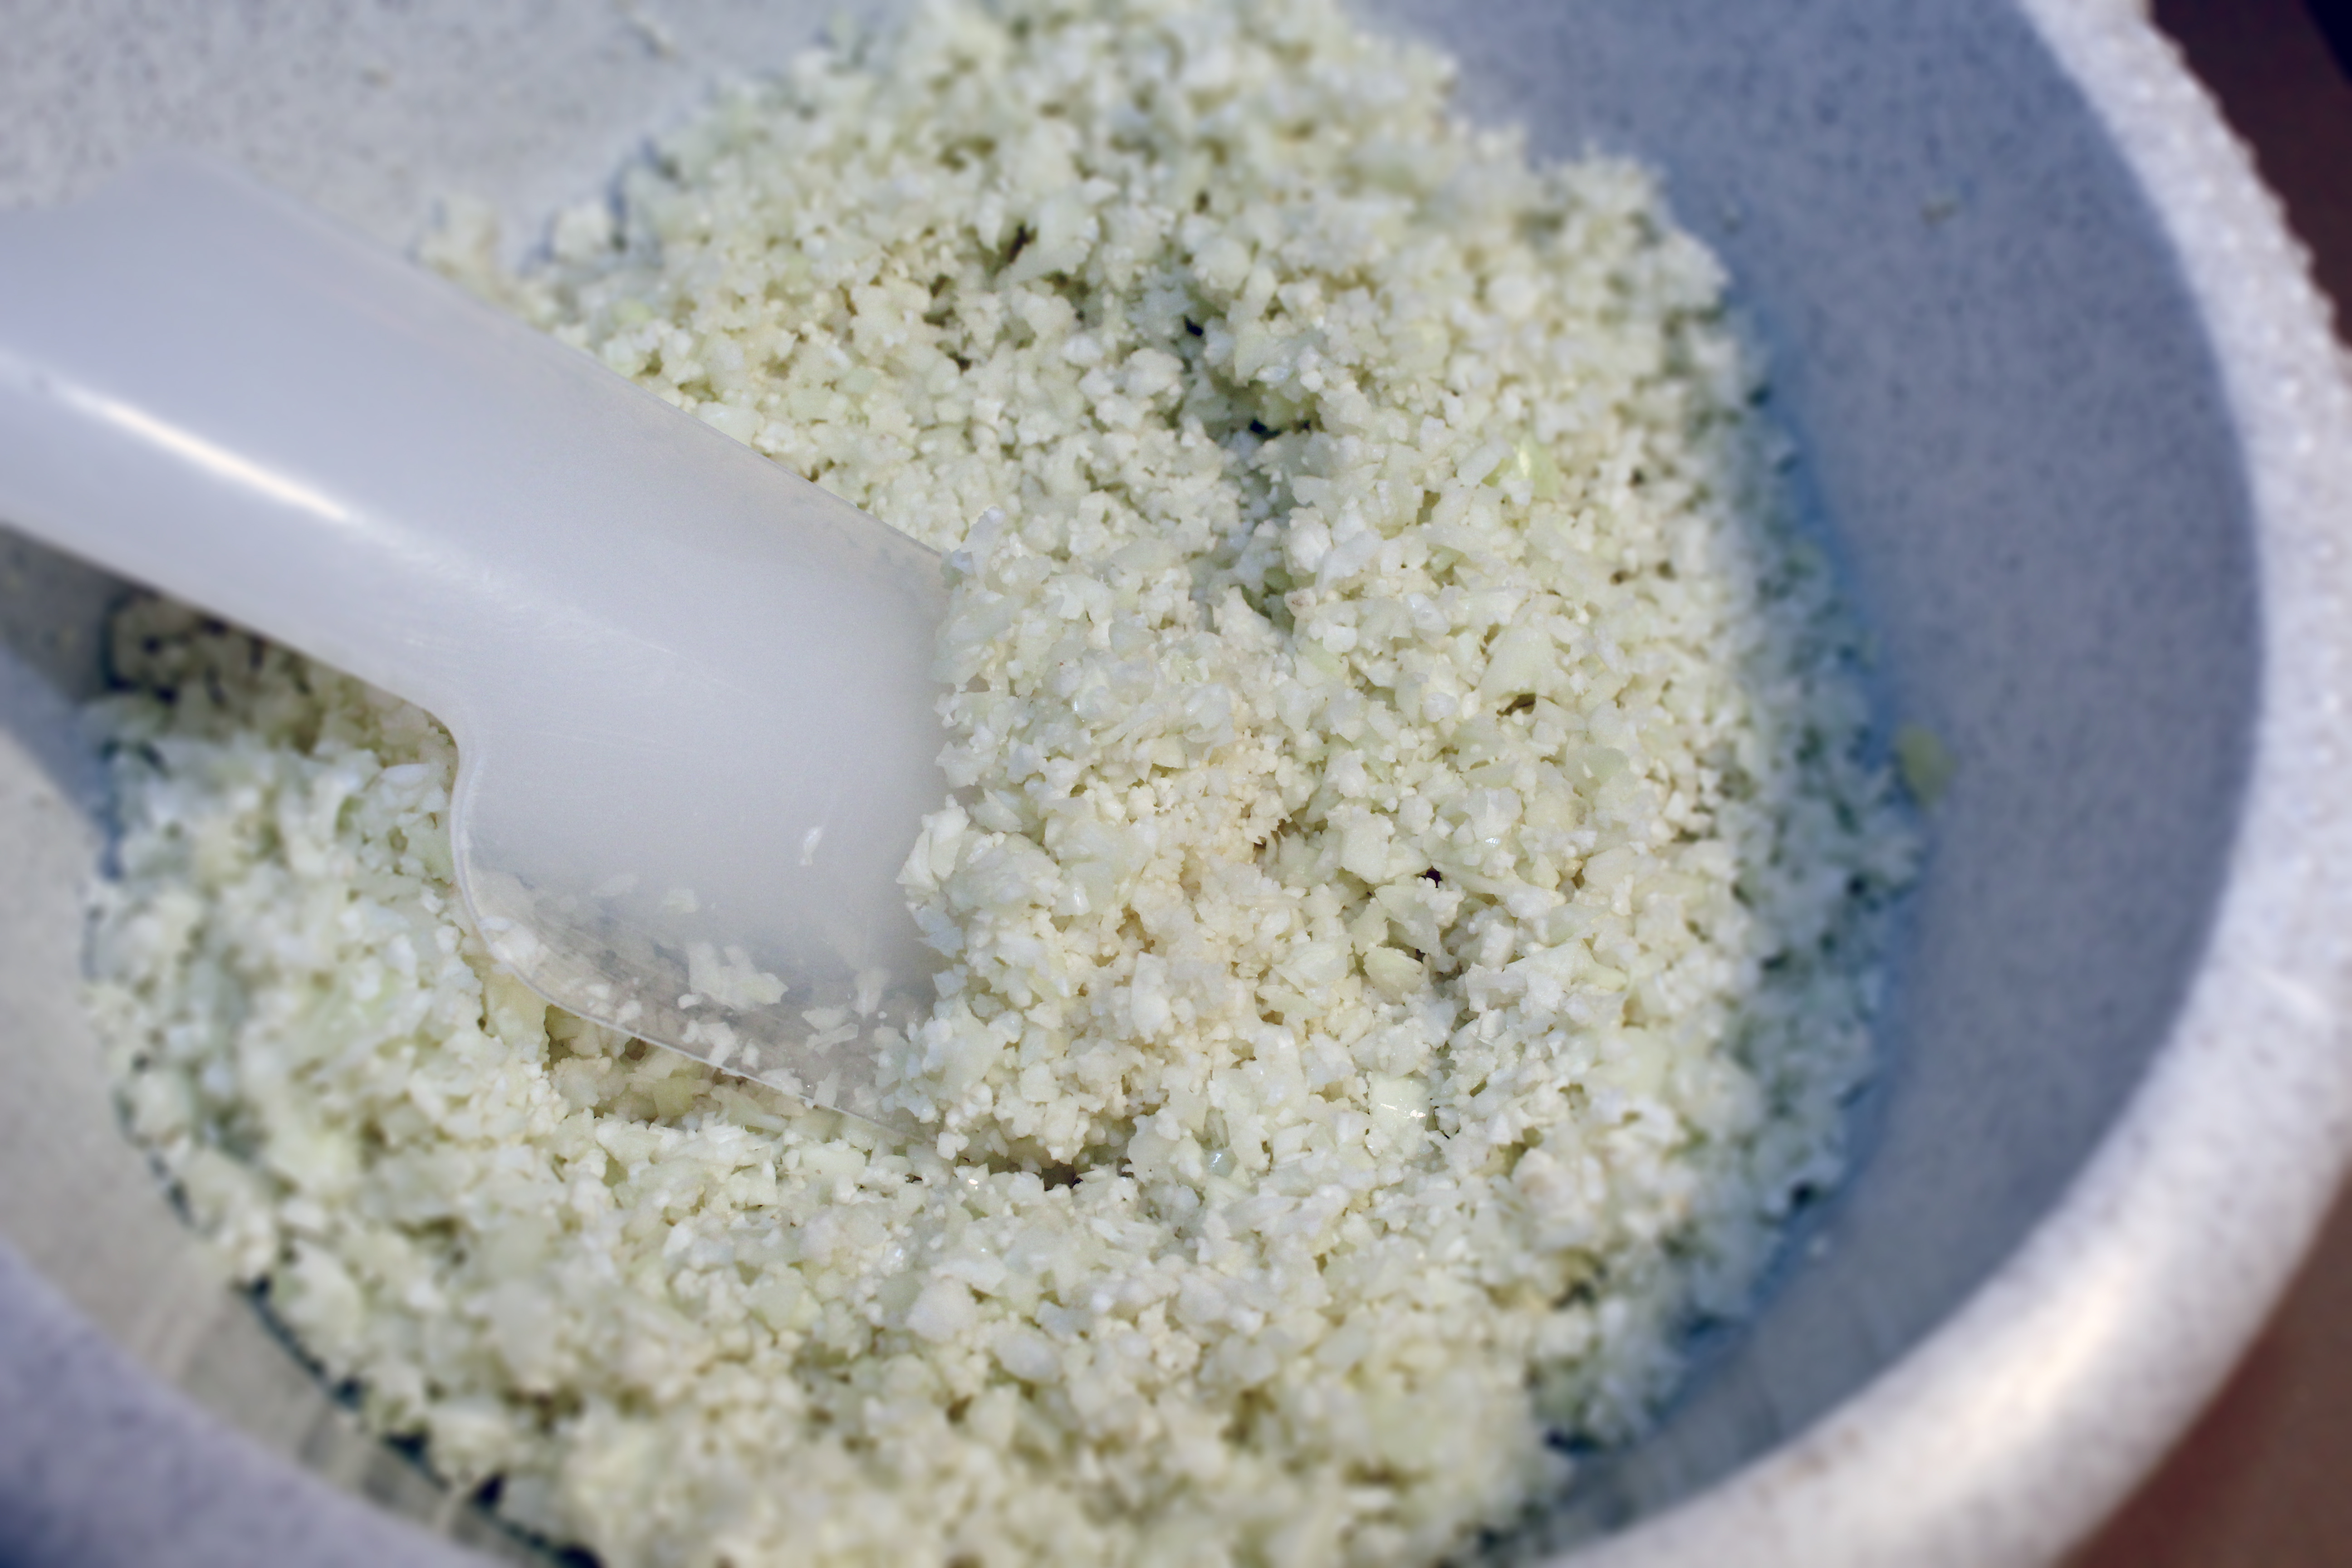 cauliflower rice : "Image result for how to make cauliflower rice Cut the hard core and stalks from the cauliflower and pulse the rest in a food processor to make grains the size of rice. Transfer to a clean towel or paper towel and press to remove any excess moisture, which can make your dish soggy."